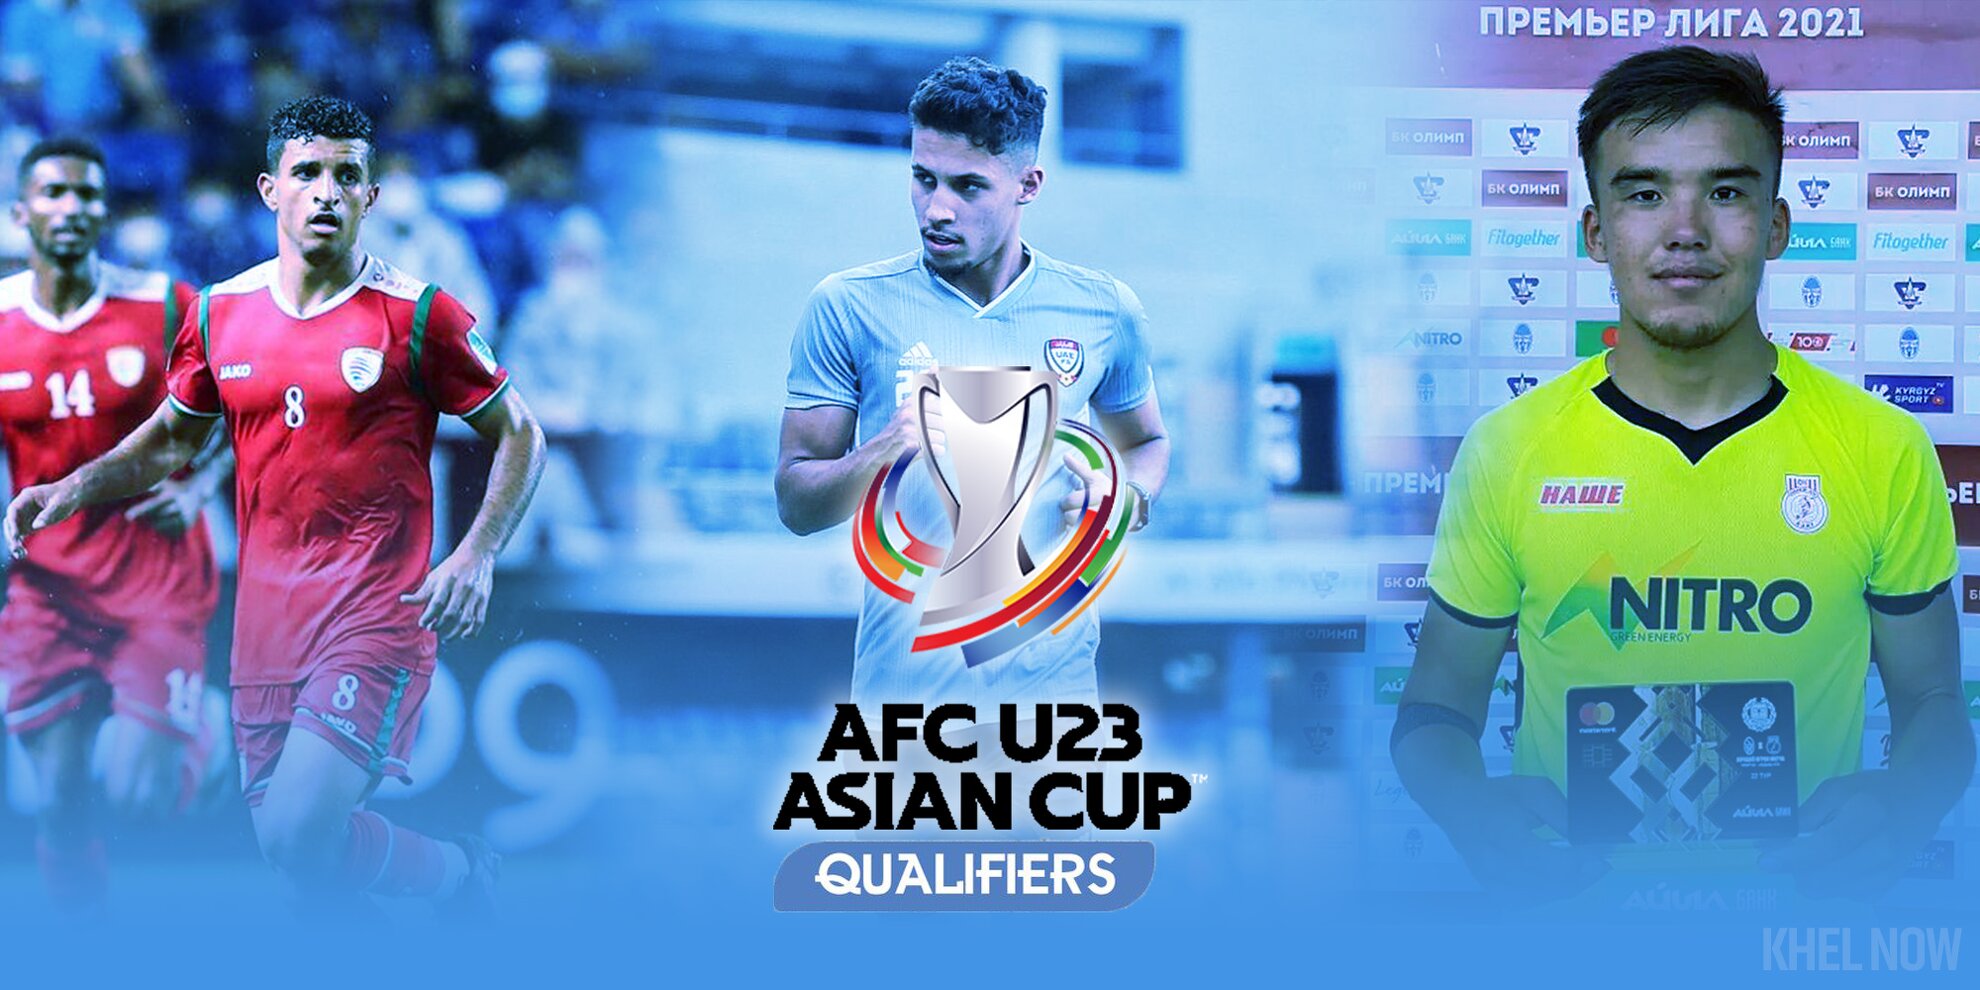 Afc asian cup qualifiers